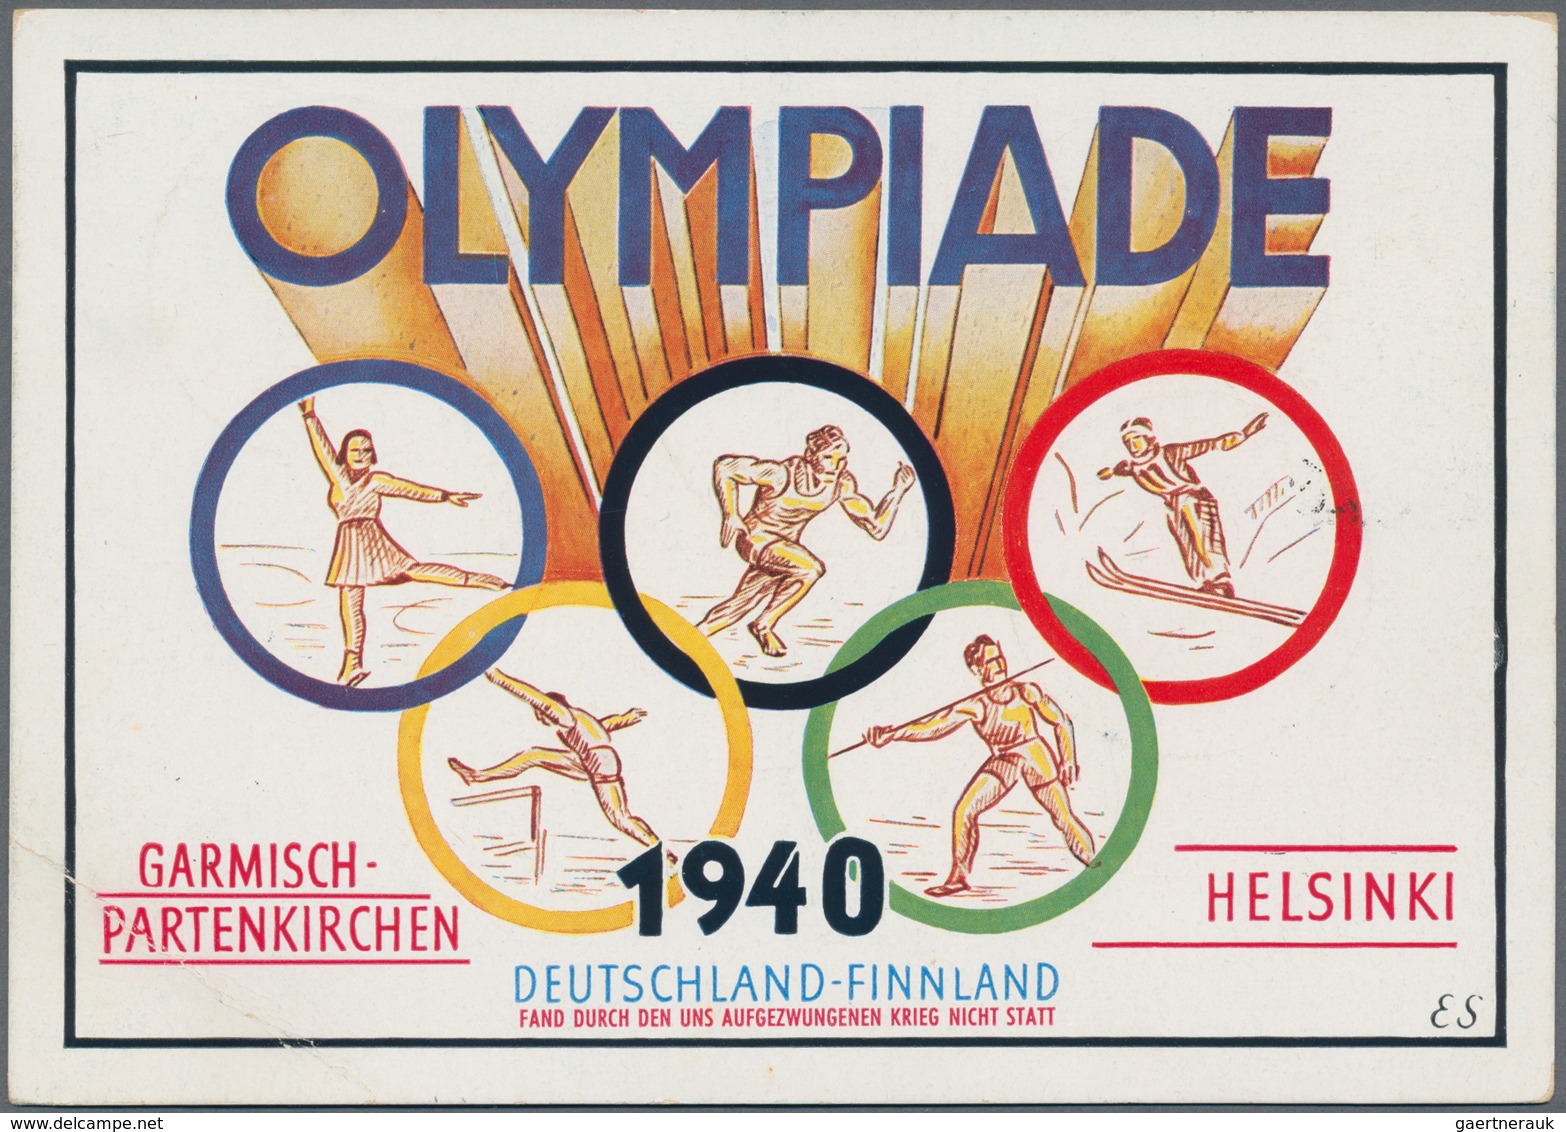 Thematik: Olympische Spiele / olympic games: 1897/2010 (ca.), "Sports" in general and "Olympic Games